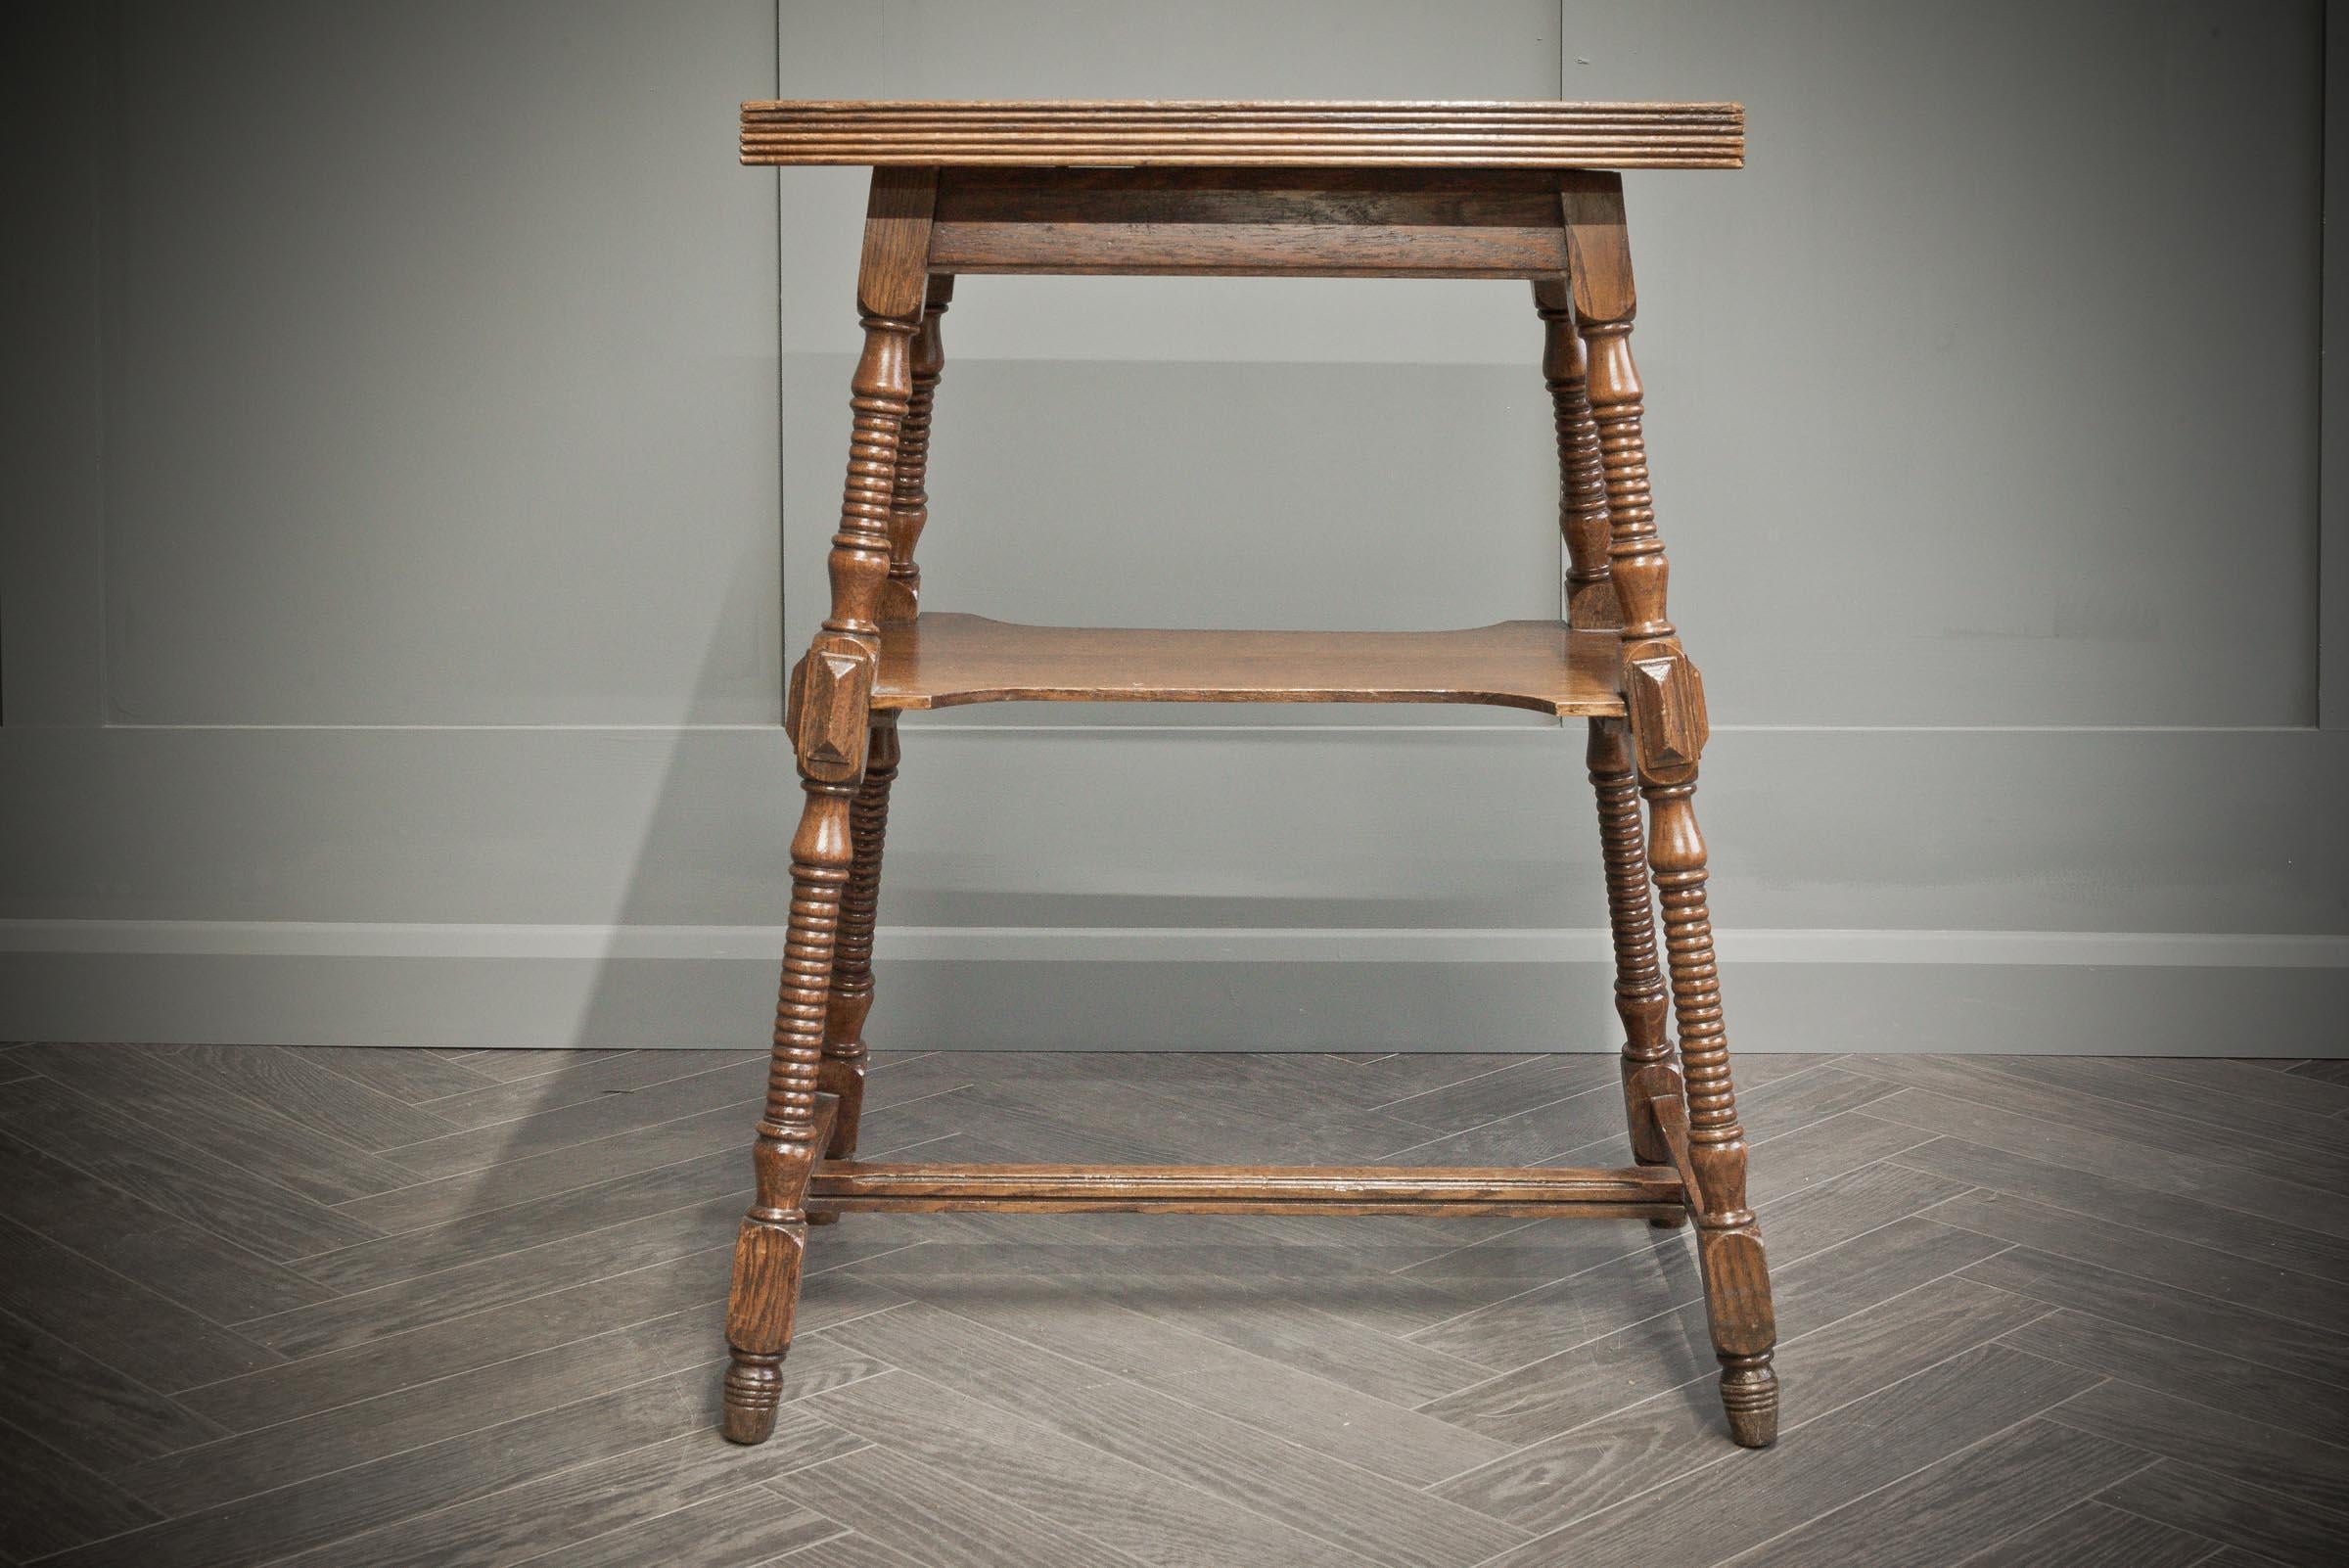 One of a kind metamorphic swivel top oak table with dark and light grains running through the wood. The table top swivels to reveal a storage compartment underneath. The table has four beautifully detailed legs with textured carvings. 